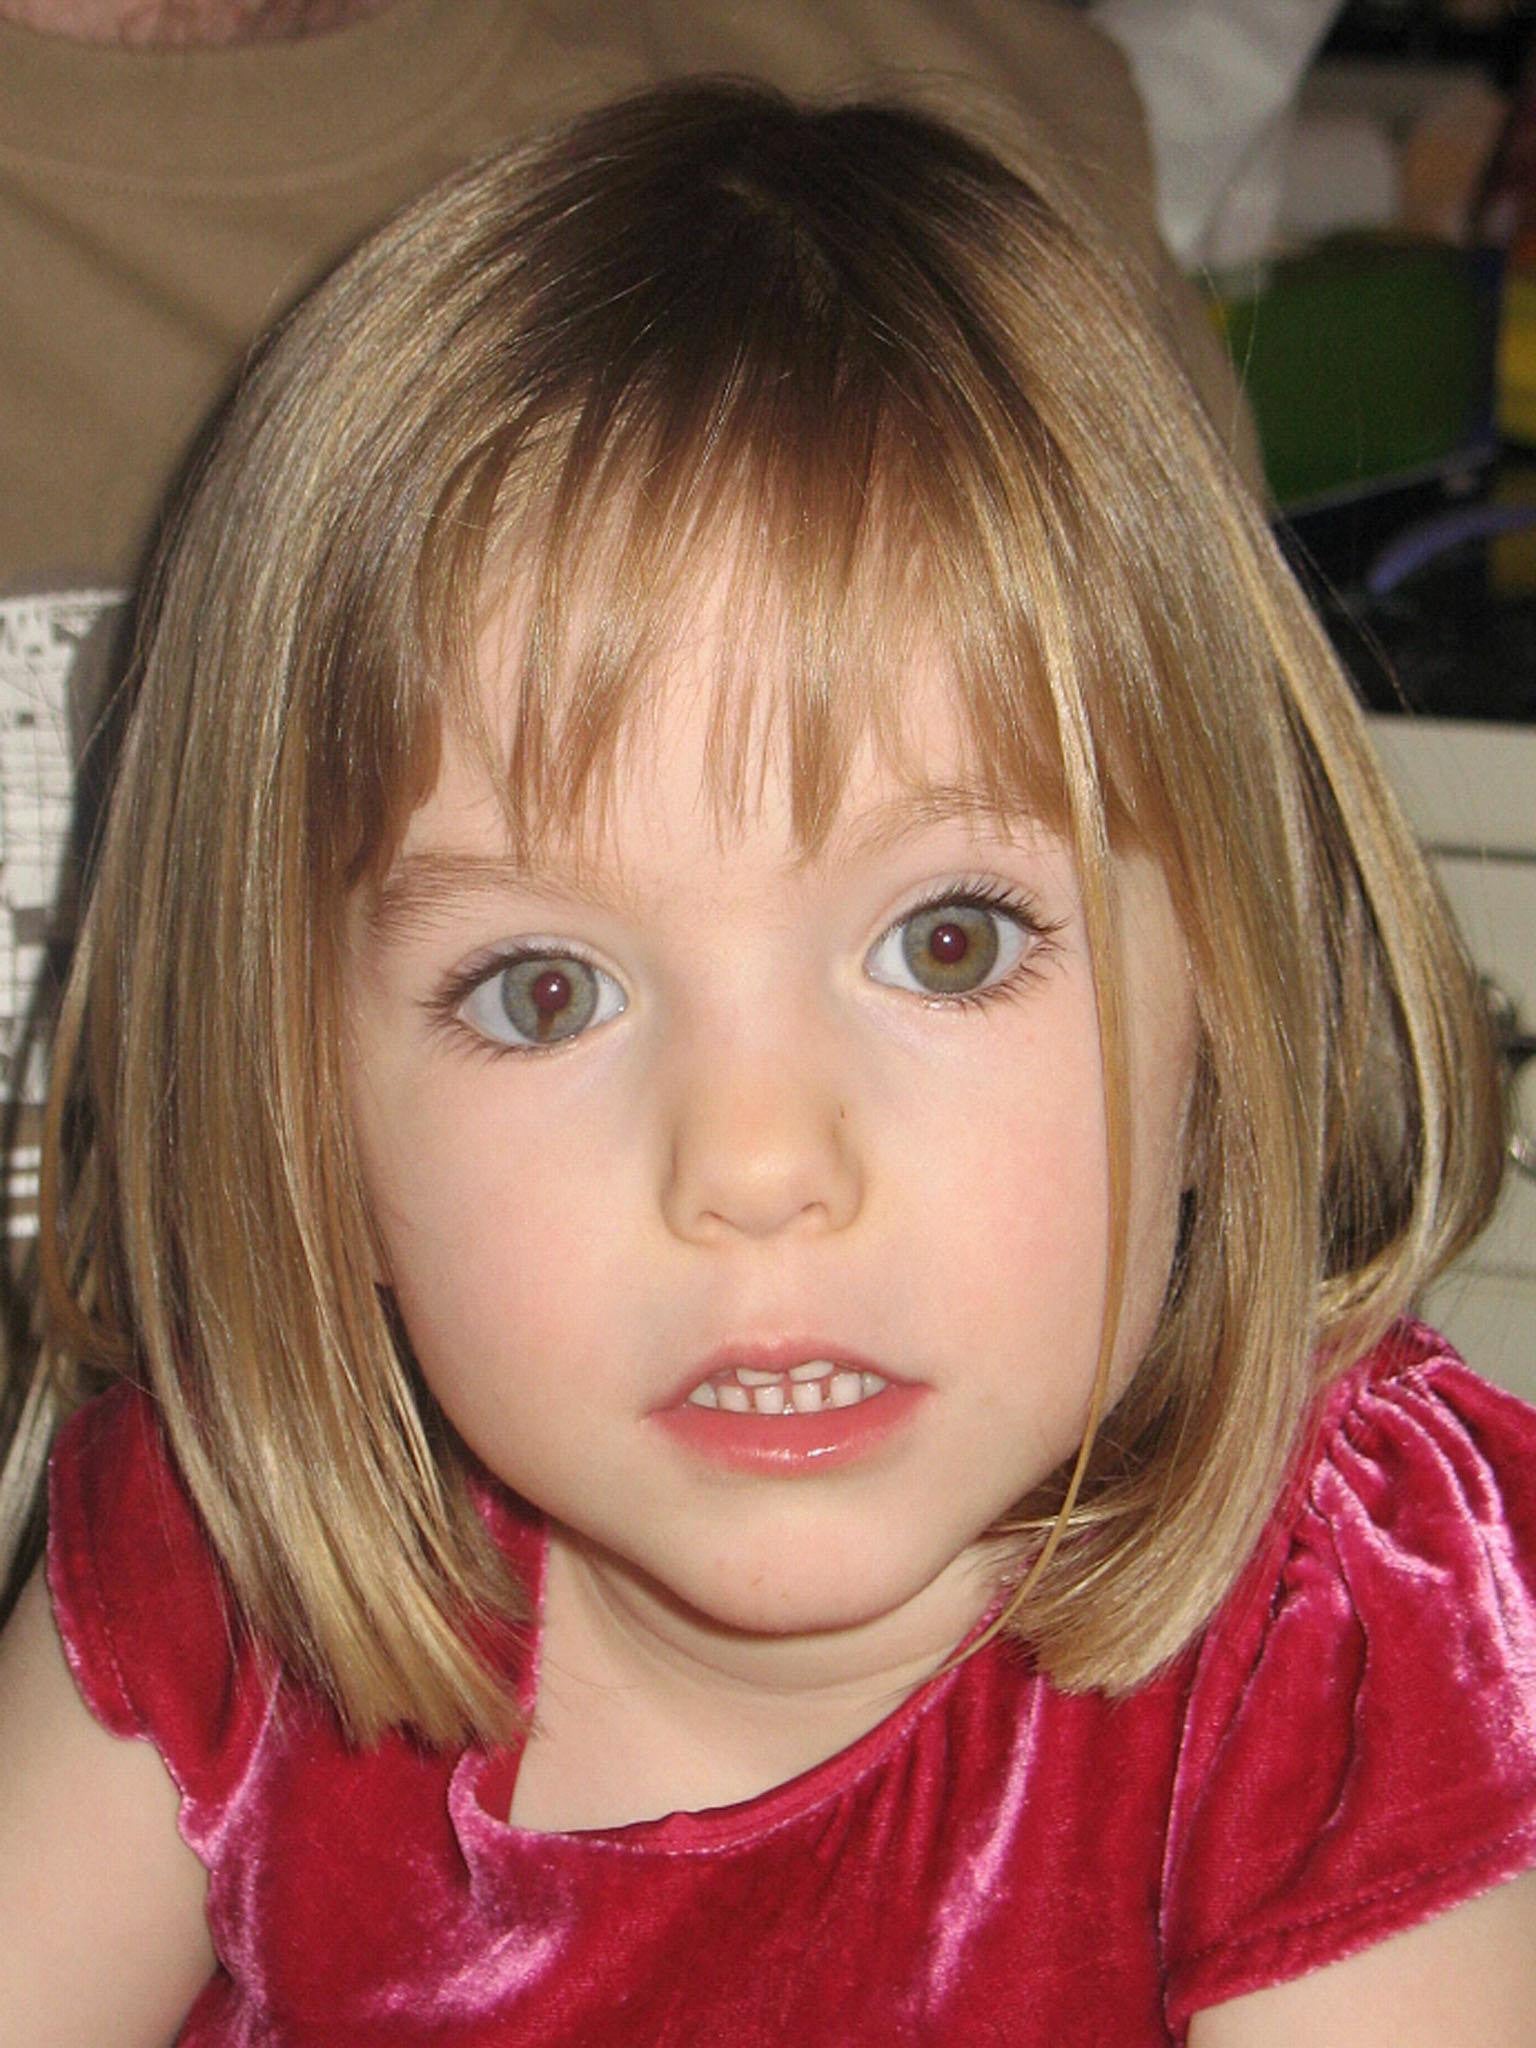 Three-year-old Madeleine McCann disappeared from her family’s holiday apartment in the Algarve in 2007